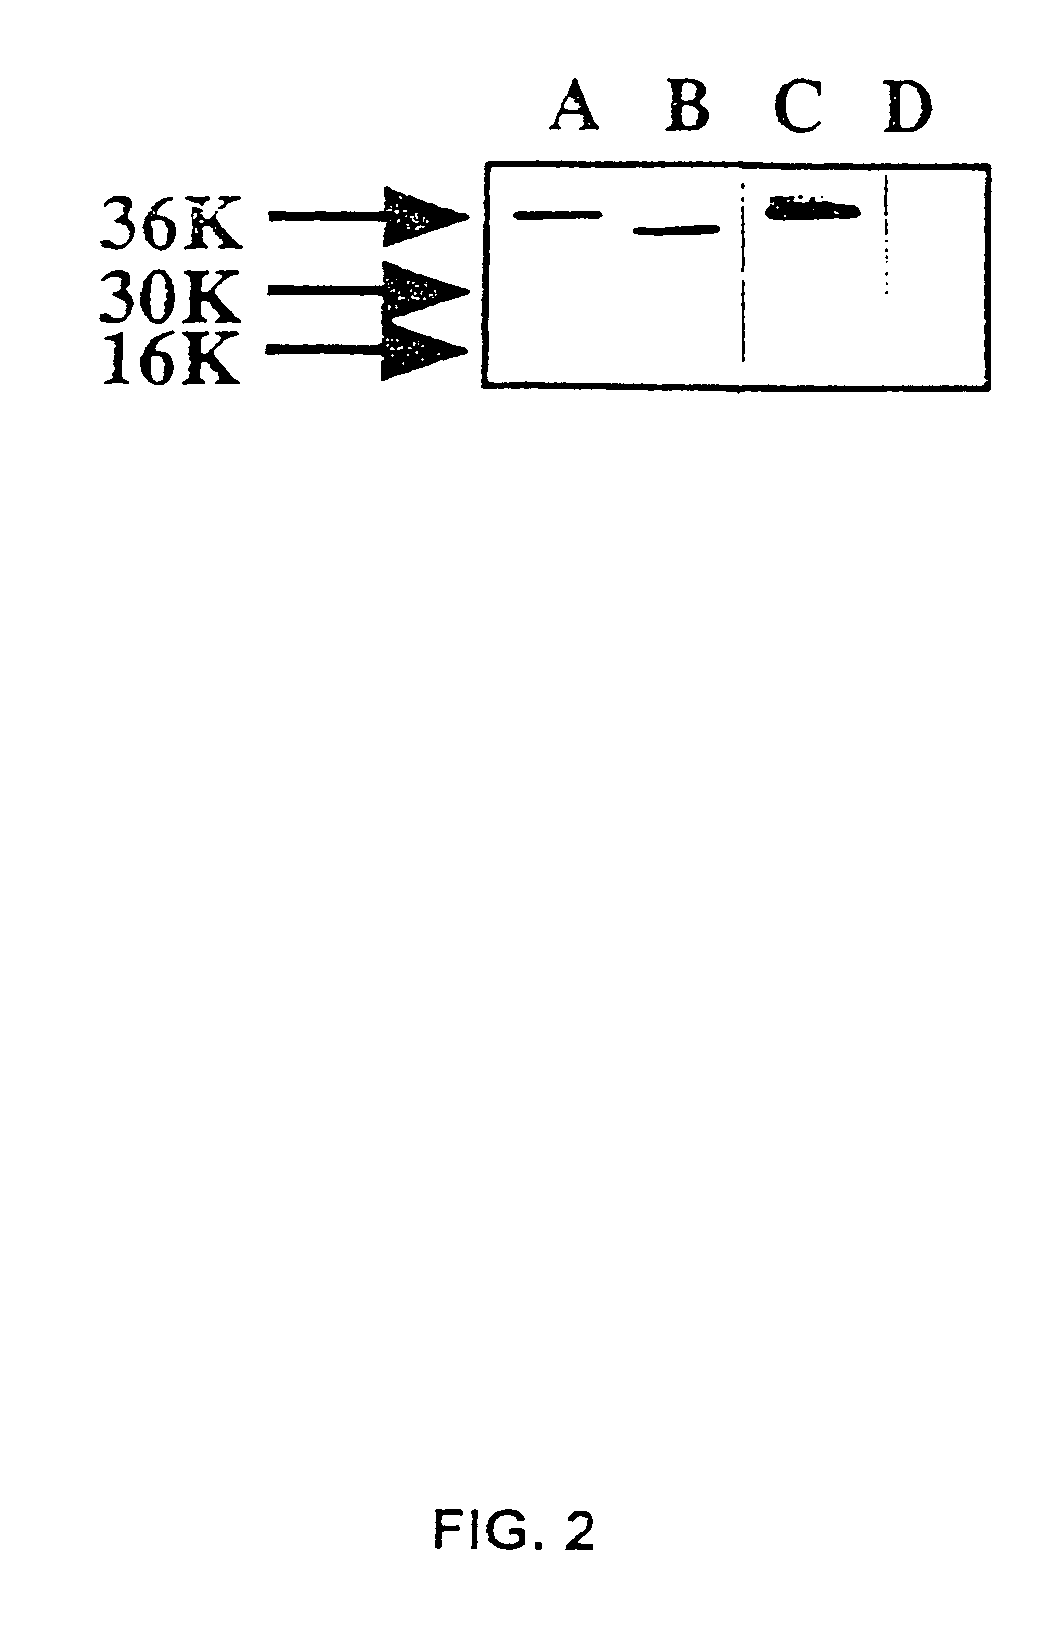 Substance P-saporin (SP-SAP) conjugates and methods of use thereof